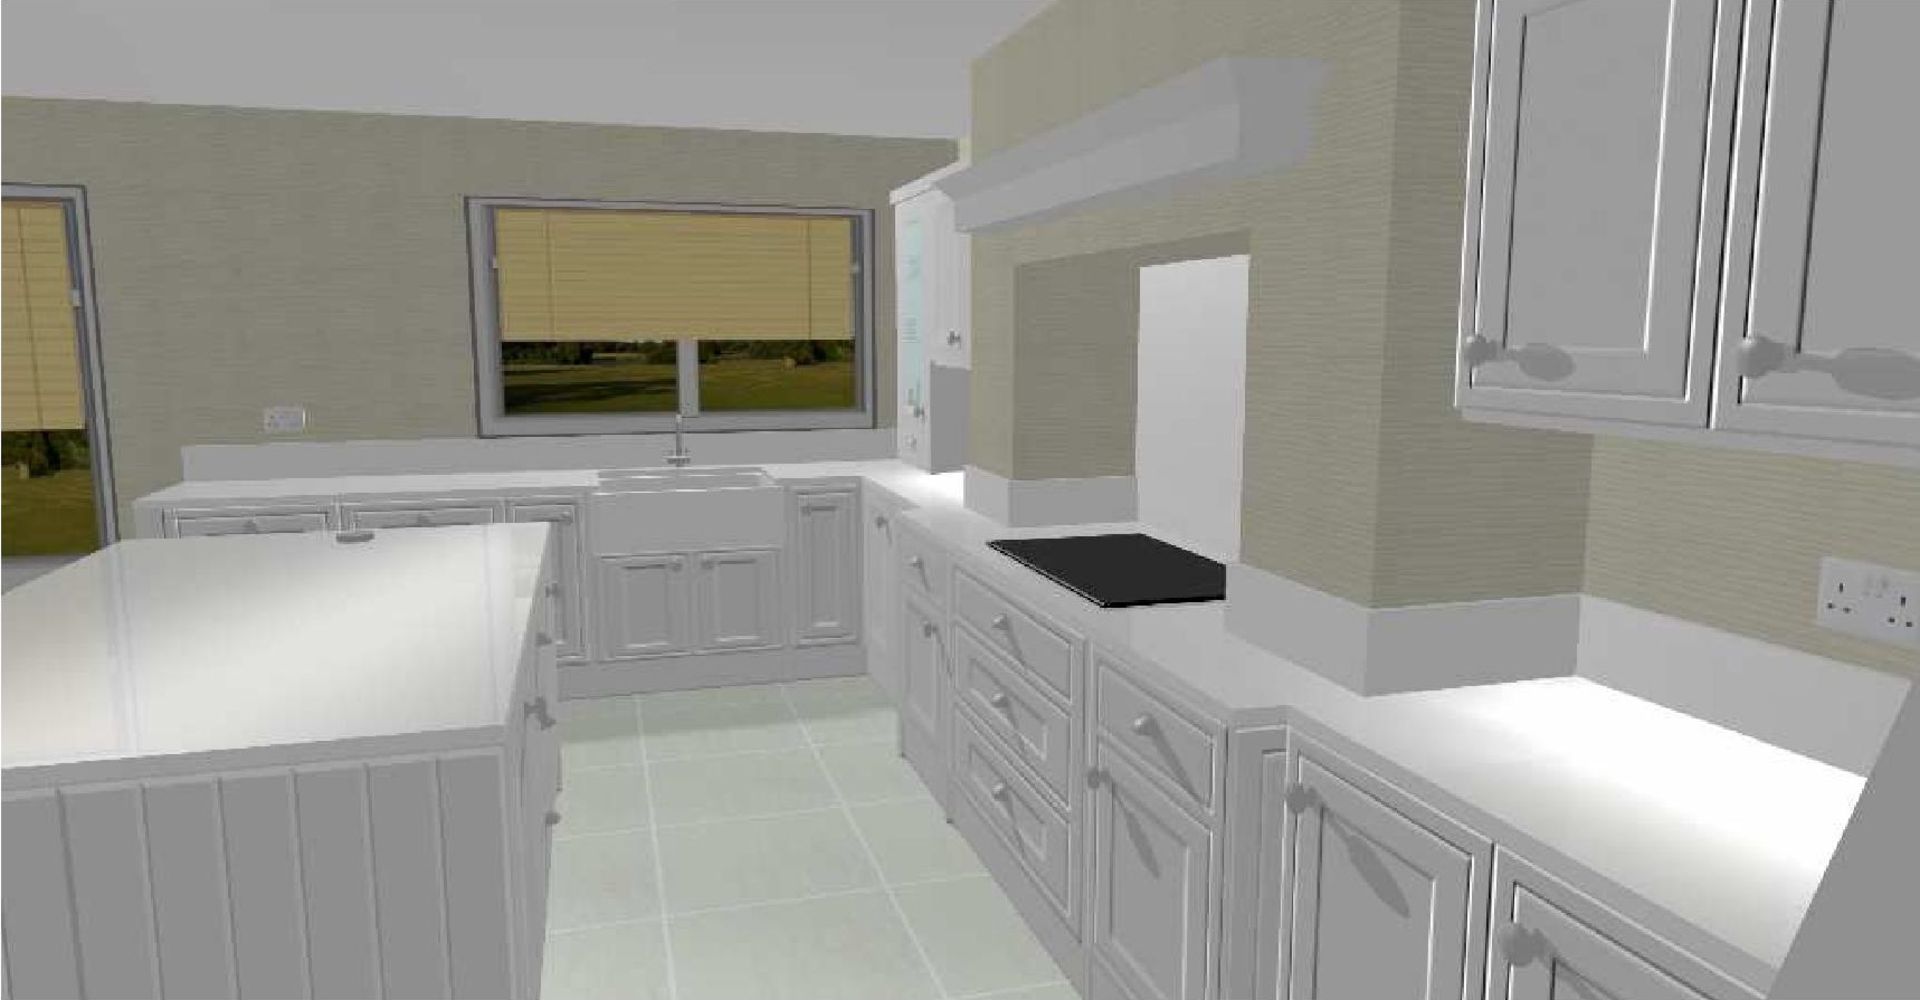 New Fitted Kitchen Designed By 1909 Kitchens - CL338 - Location: Rainhill - Value - £17,000 - Image 4 of 5